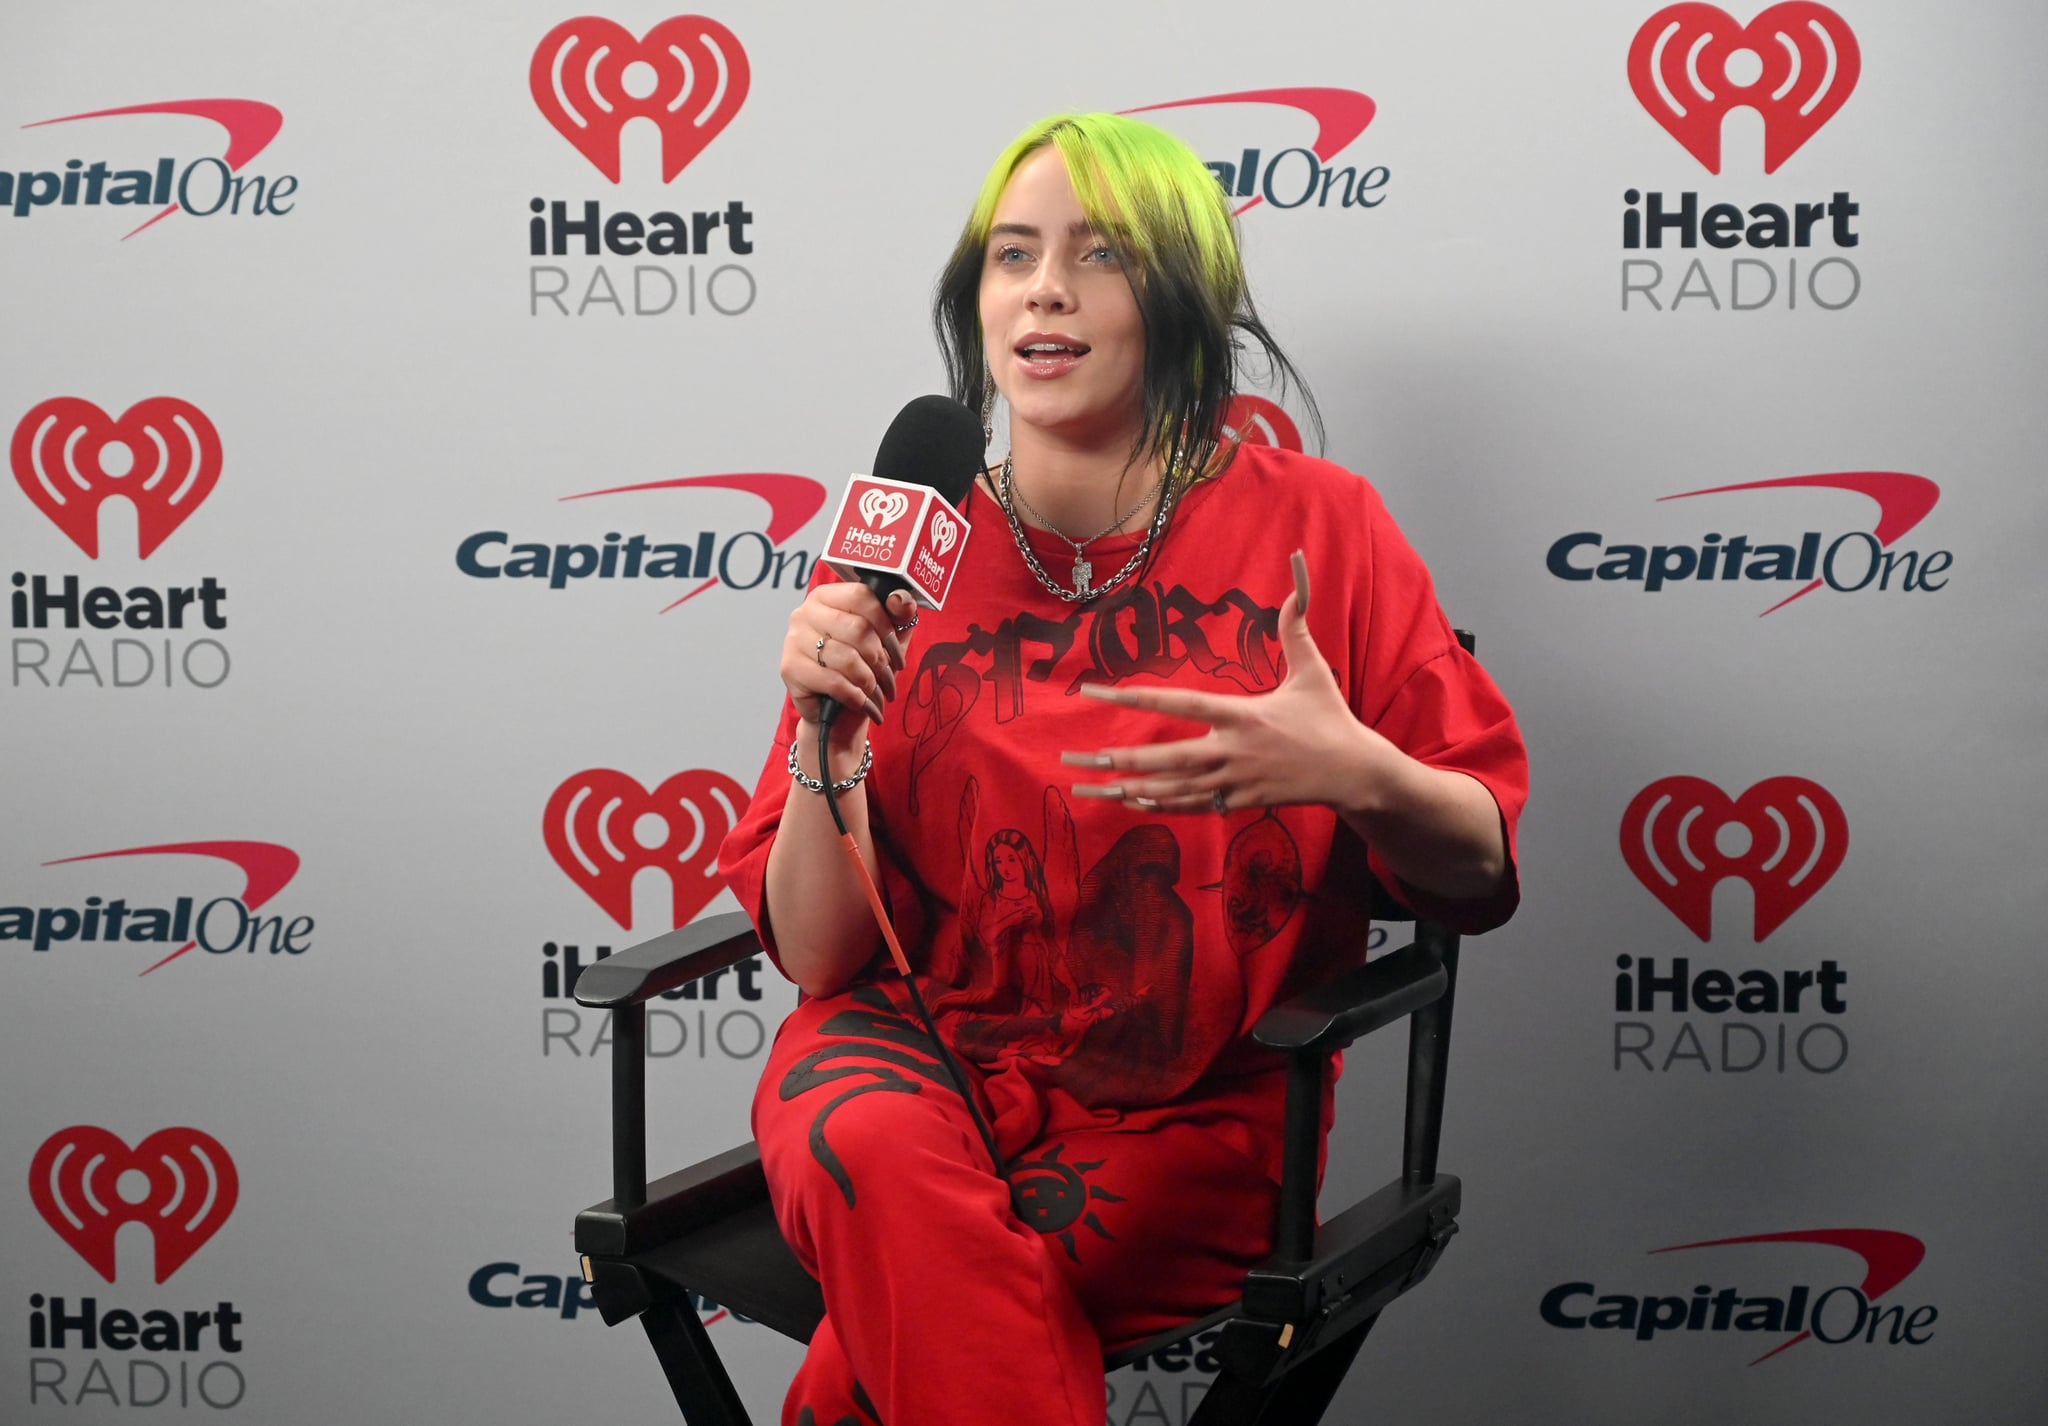 BURBANK, CALIFORNIA - JANUARY 28: (EDITORIAL USE ONLY) In this image released on January 28, Billie Eilish speaks during an interview backstage during the 2021 iHeartRadio ALTer EGO Presented by Capital One stream on LiveXLive.com and broadcast on iHeartRadio's Alternative and Rock stations nationwide on January 28, 2021. (Photo by Kevin Mazur/Getty Images for iHeartMedia)